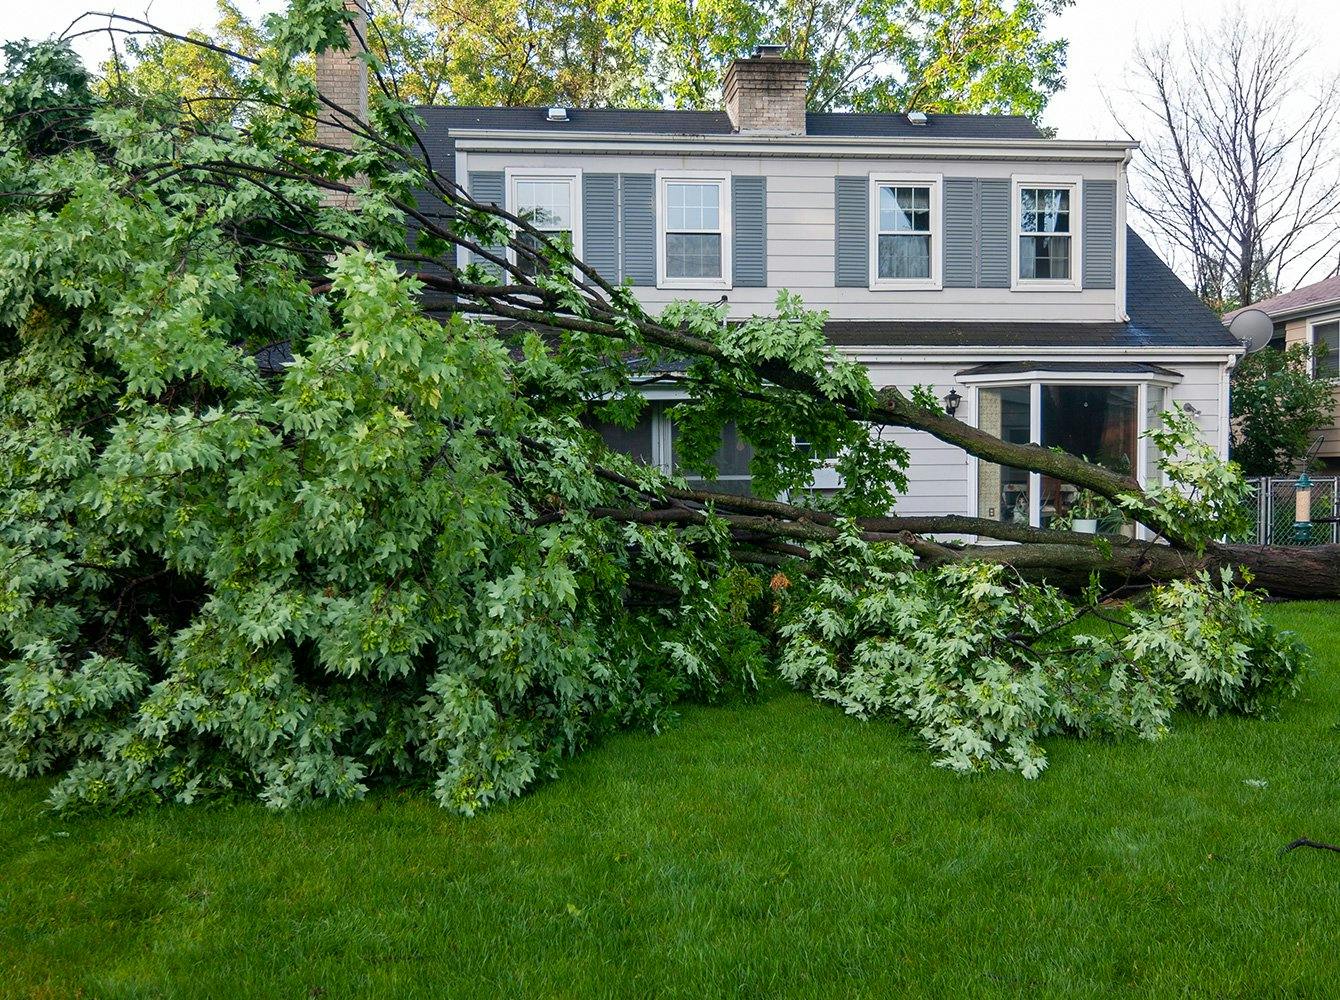 house with a downed tree in front